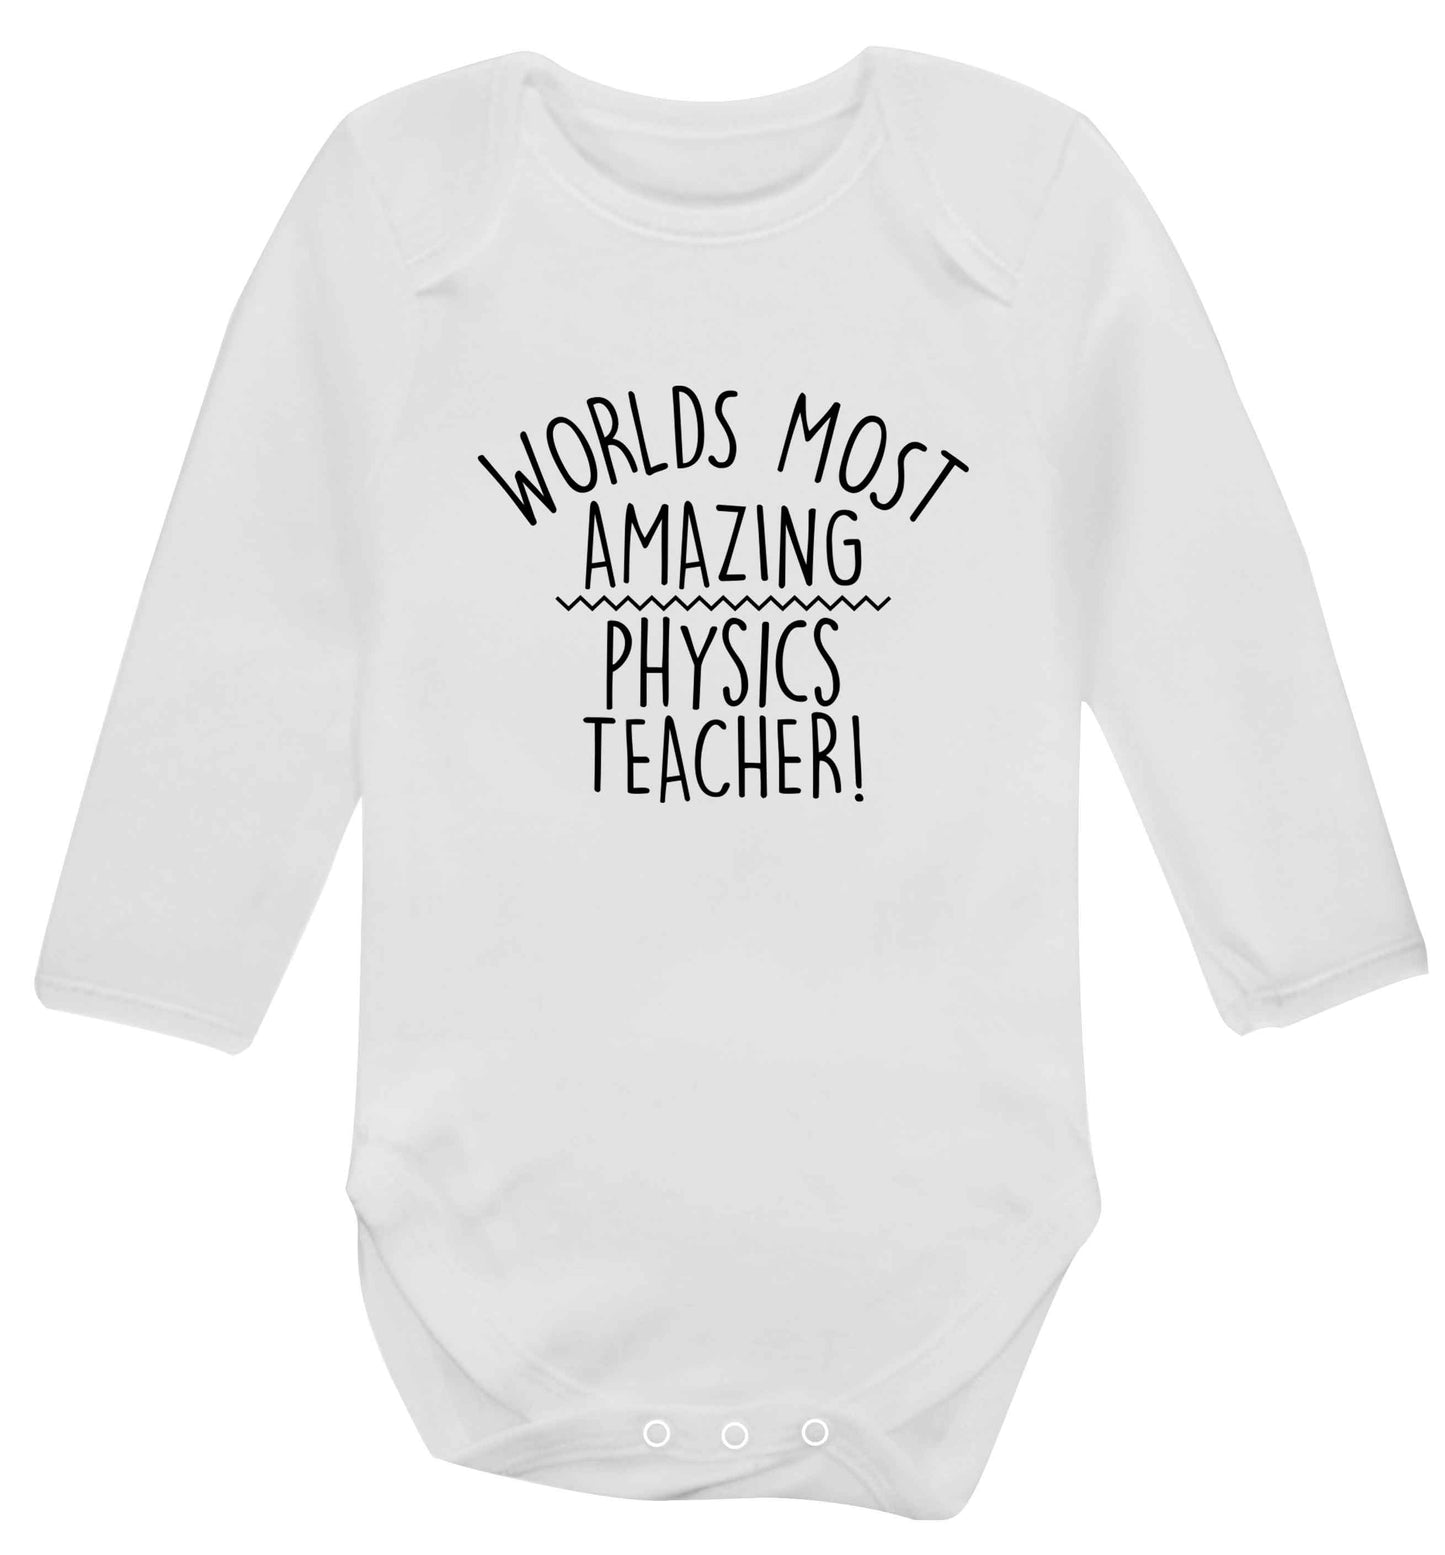 Worlds most amazing physics teacher baby vest long sleeved white 6-12 months